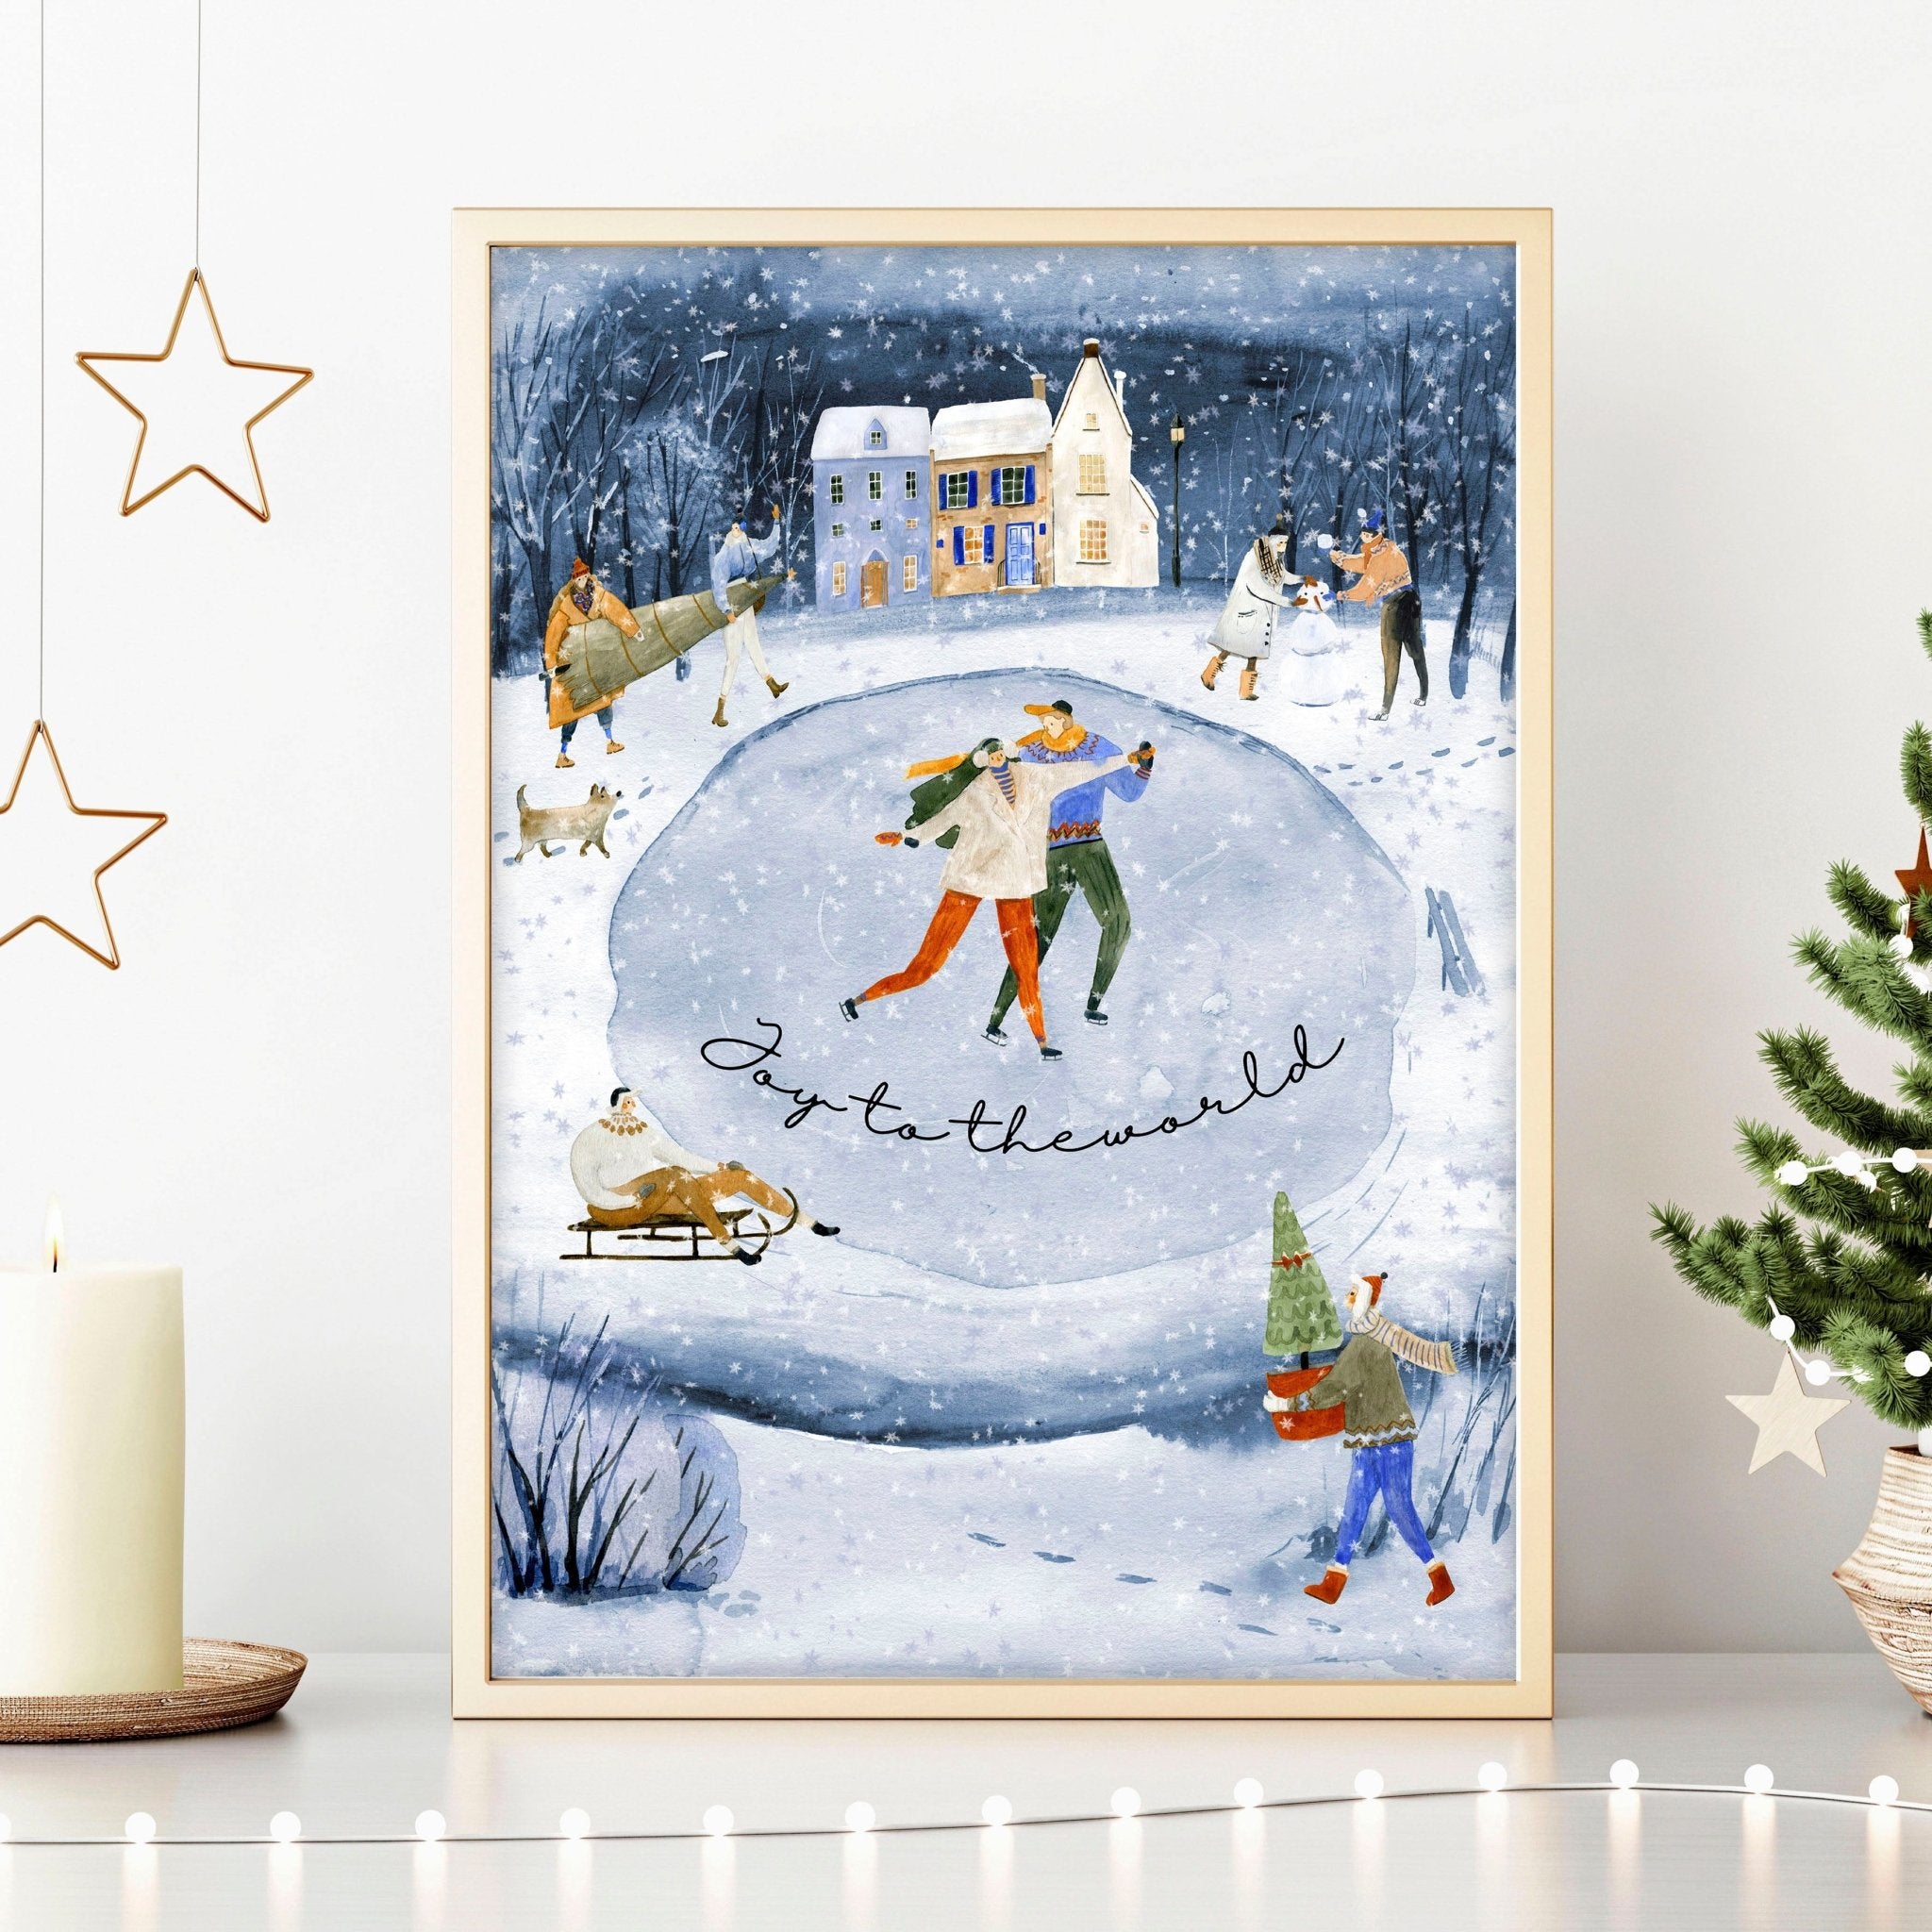 Christmas wall decorations indoor | wall art print - About Wall Art